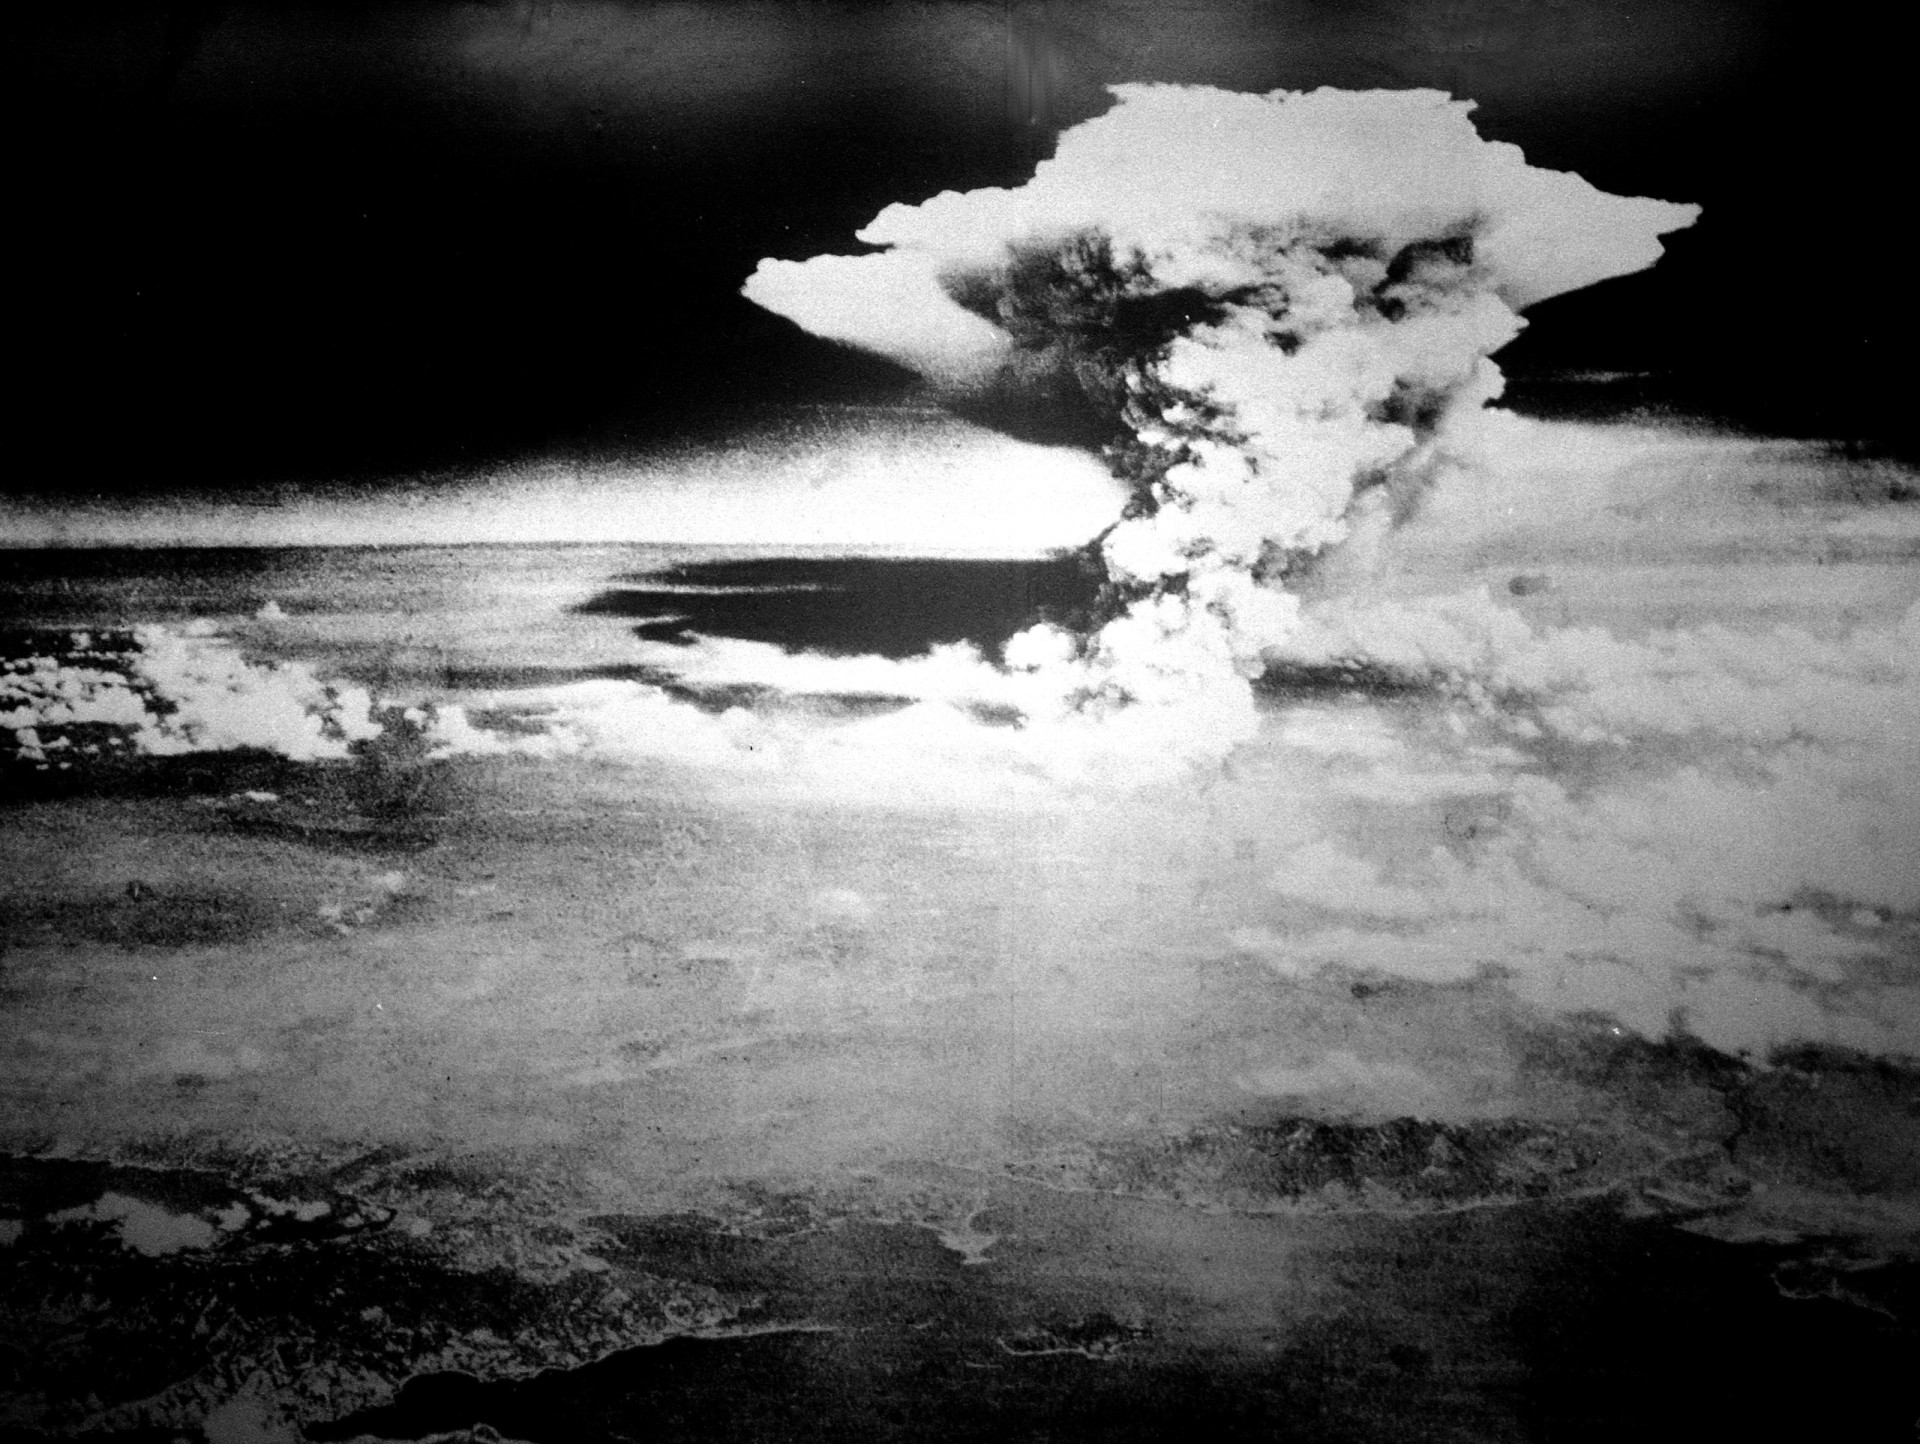 <p>They studied all aspects of the <a href="https://www.starsinsider.com/lifestyle/495220/the-disturbing-evolution-of-nuclear-weapons" rel="noopener">nuclear</a> blast, including the visual impact if it was detonated on the dark or light side of the Moon, as well as dust and gas behavior.</p><p>You may also like:<a href="https://www.starsinsider.com/n/342686?utm_source=msn.com&utm_medium=display&utm_campaign=referral_description&utm_content=713901en-ph"> Fascinating ice discoveries frozen in time</a></p>